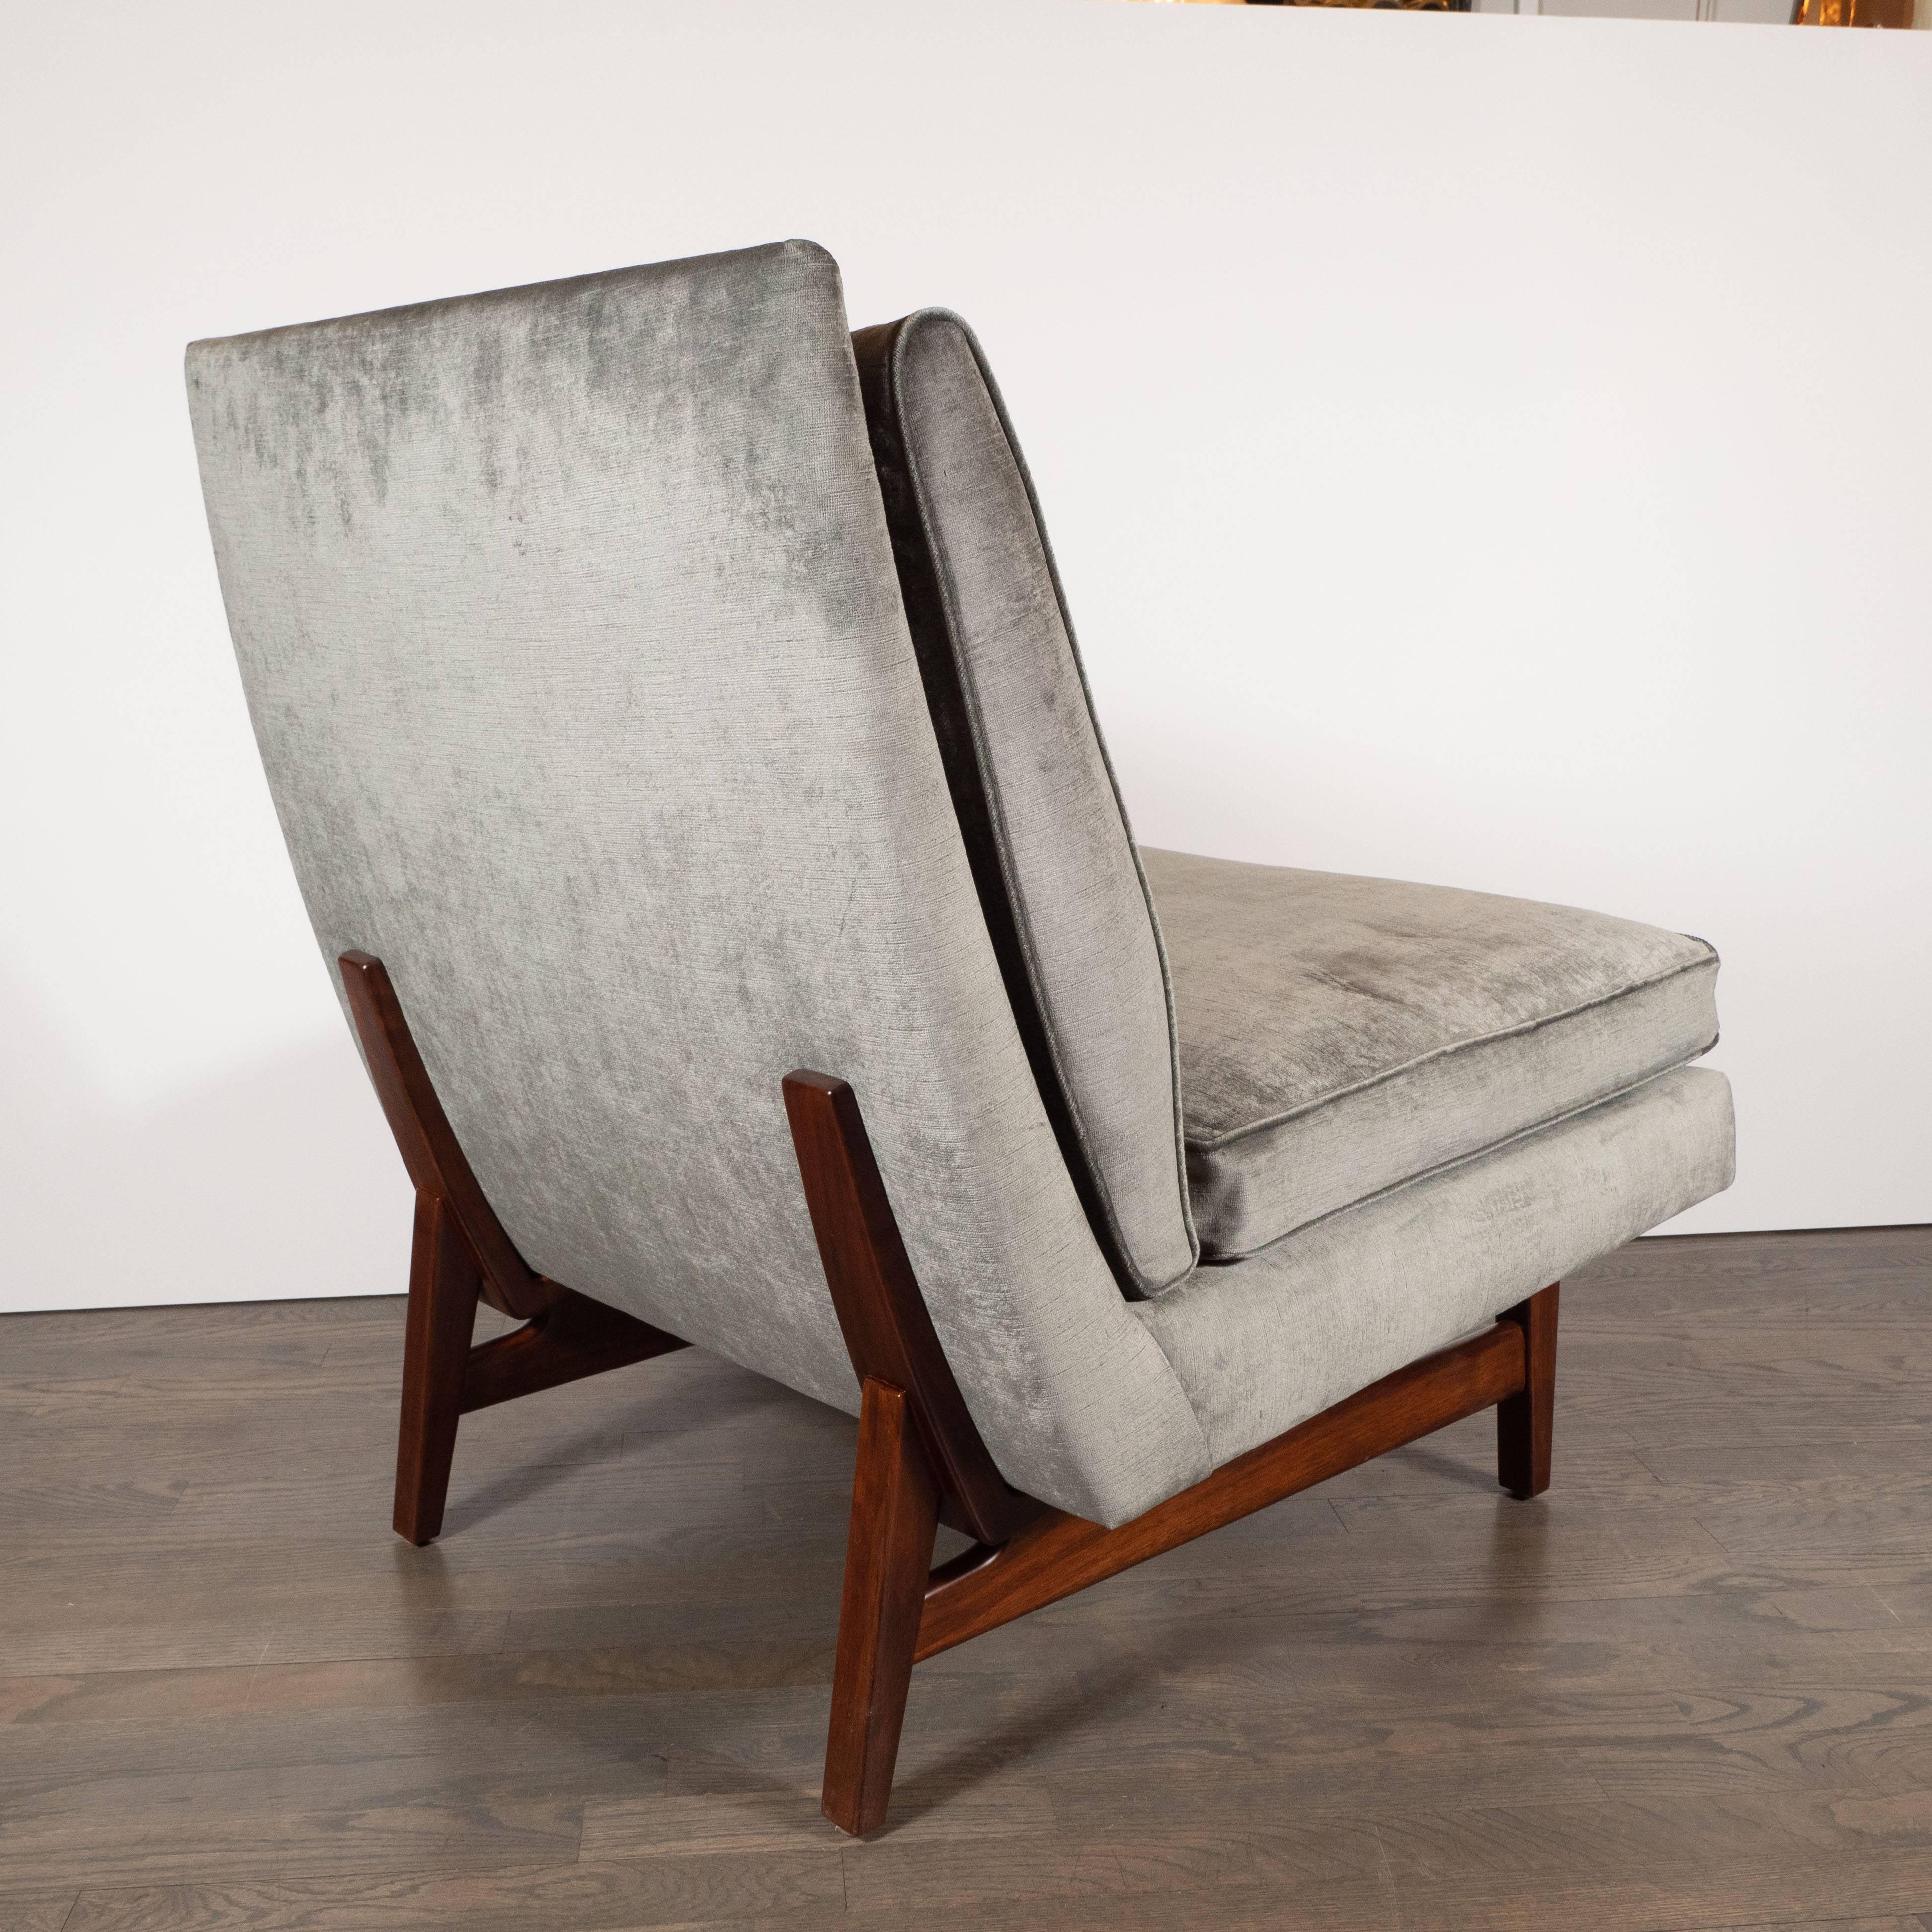 Mid-20th Century Midcentury Slipper Chair in Hand Rubbed Walnut & Sage Velvet by Jens Risom